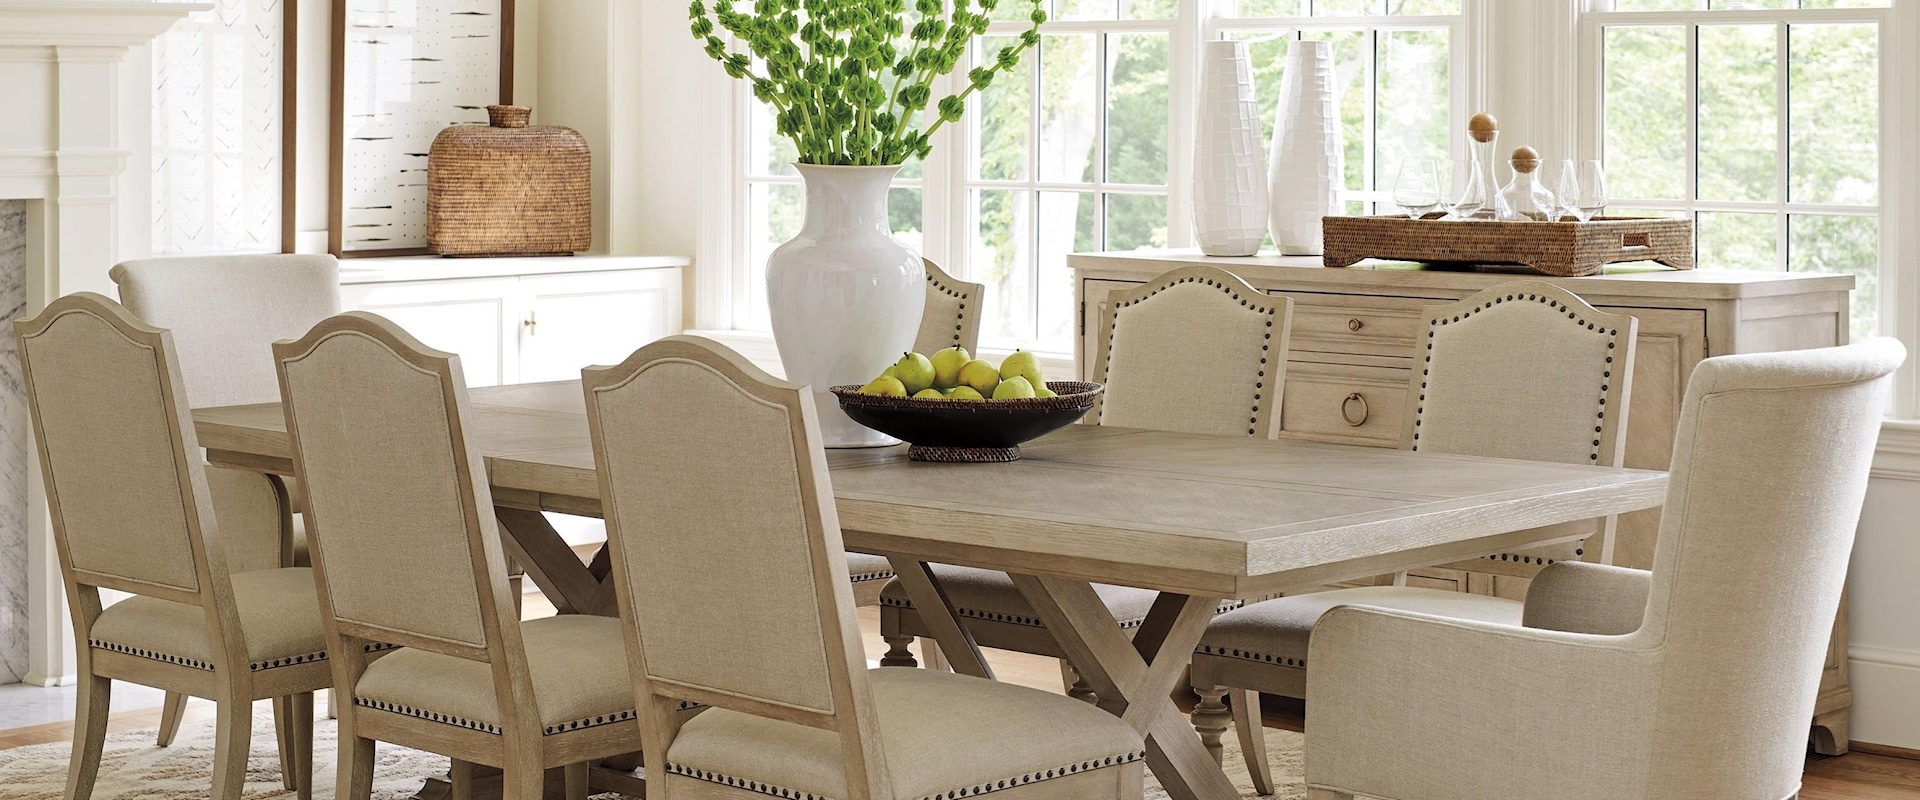 9-Piece Dining Set with Rockpoint Table,  Aidan Linen Chairs, Serra Linen Chairs